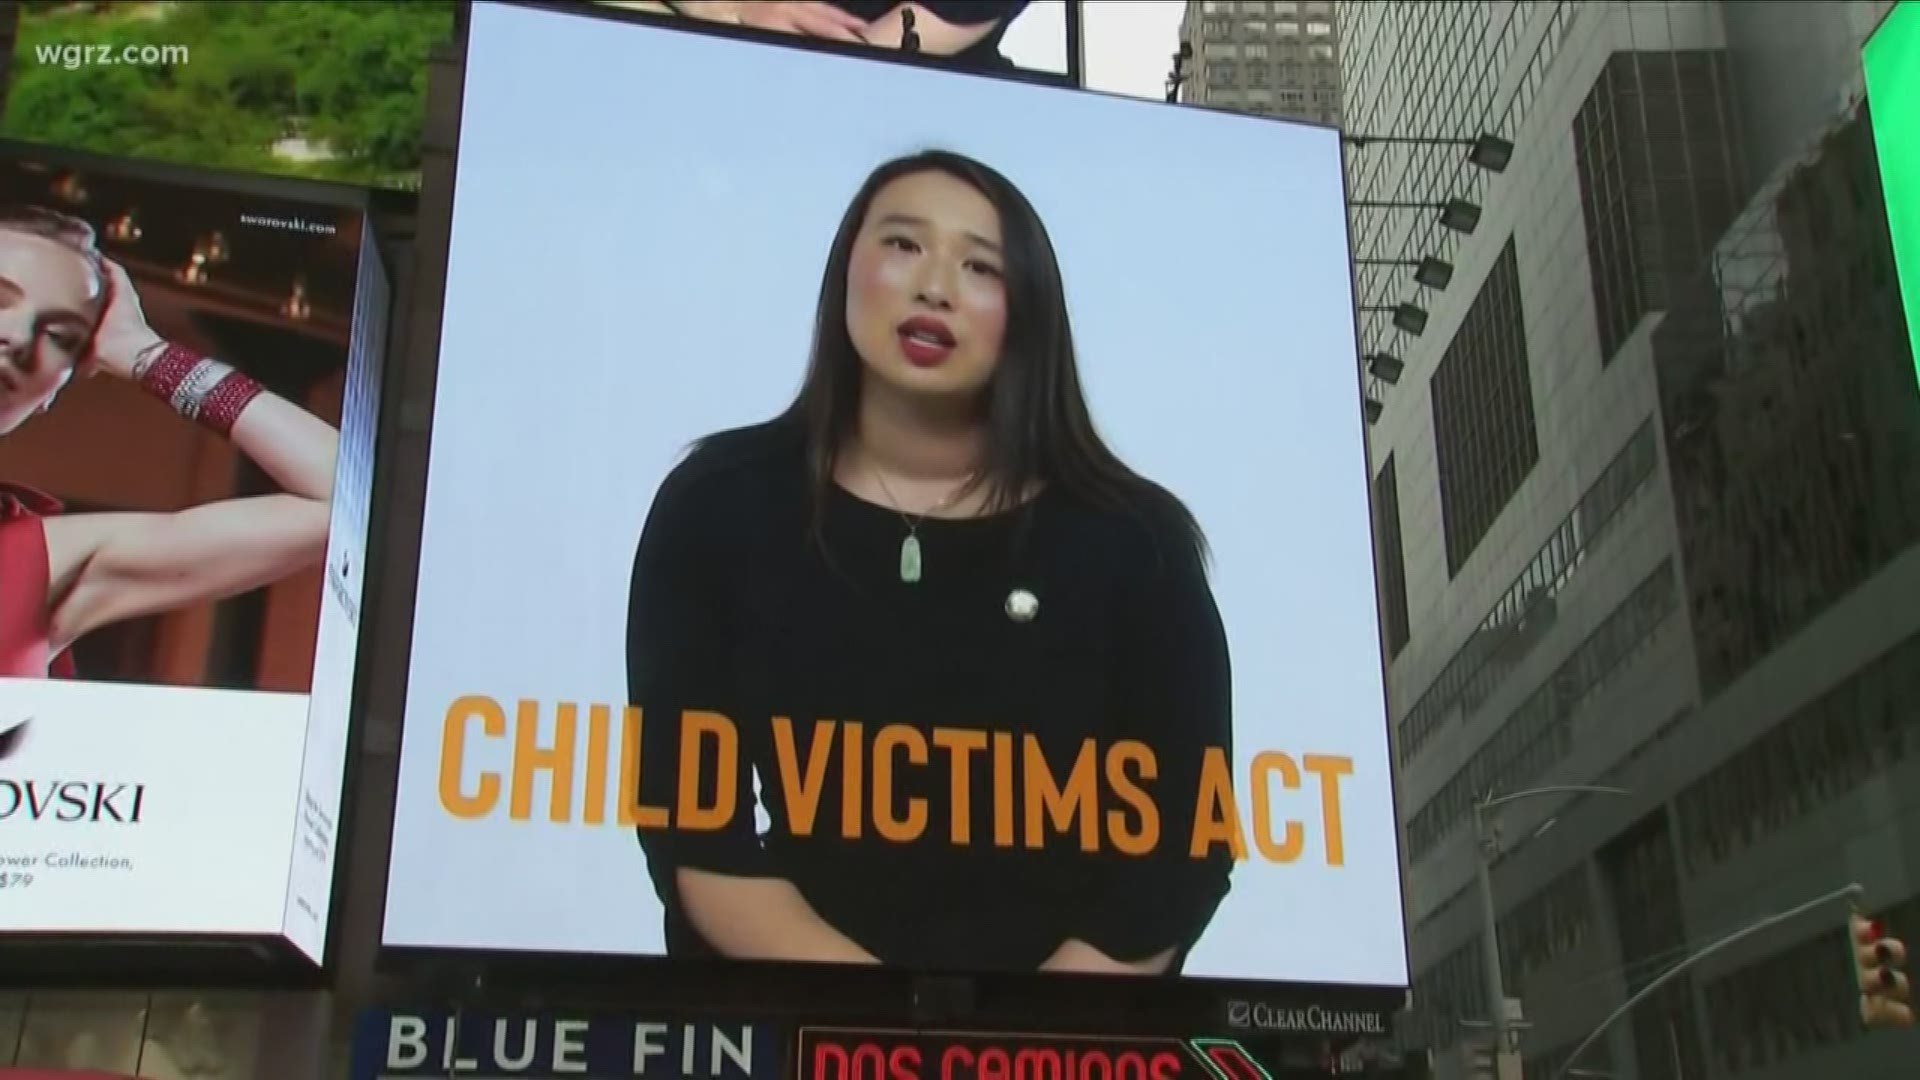 Advocates ask victims to come forward now